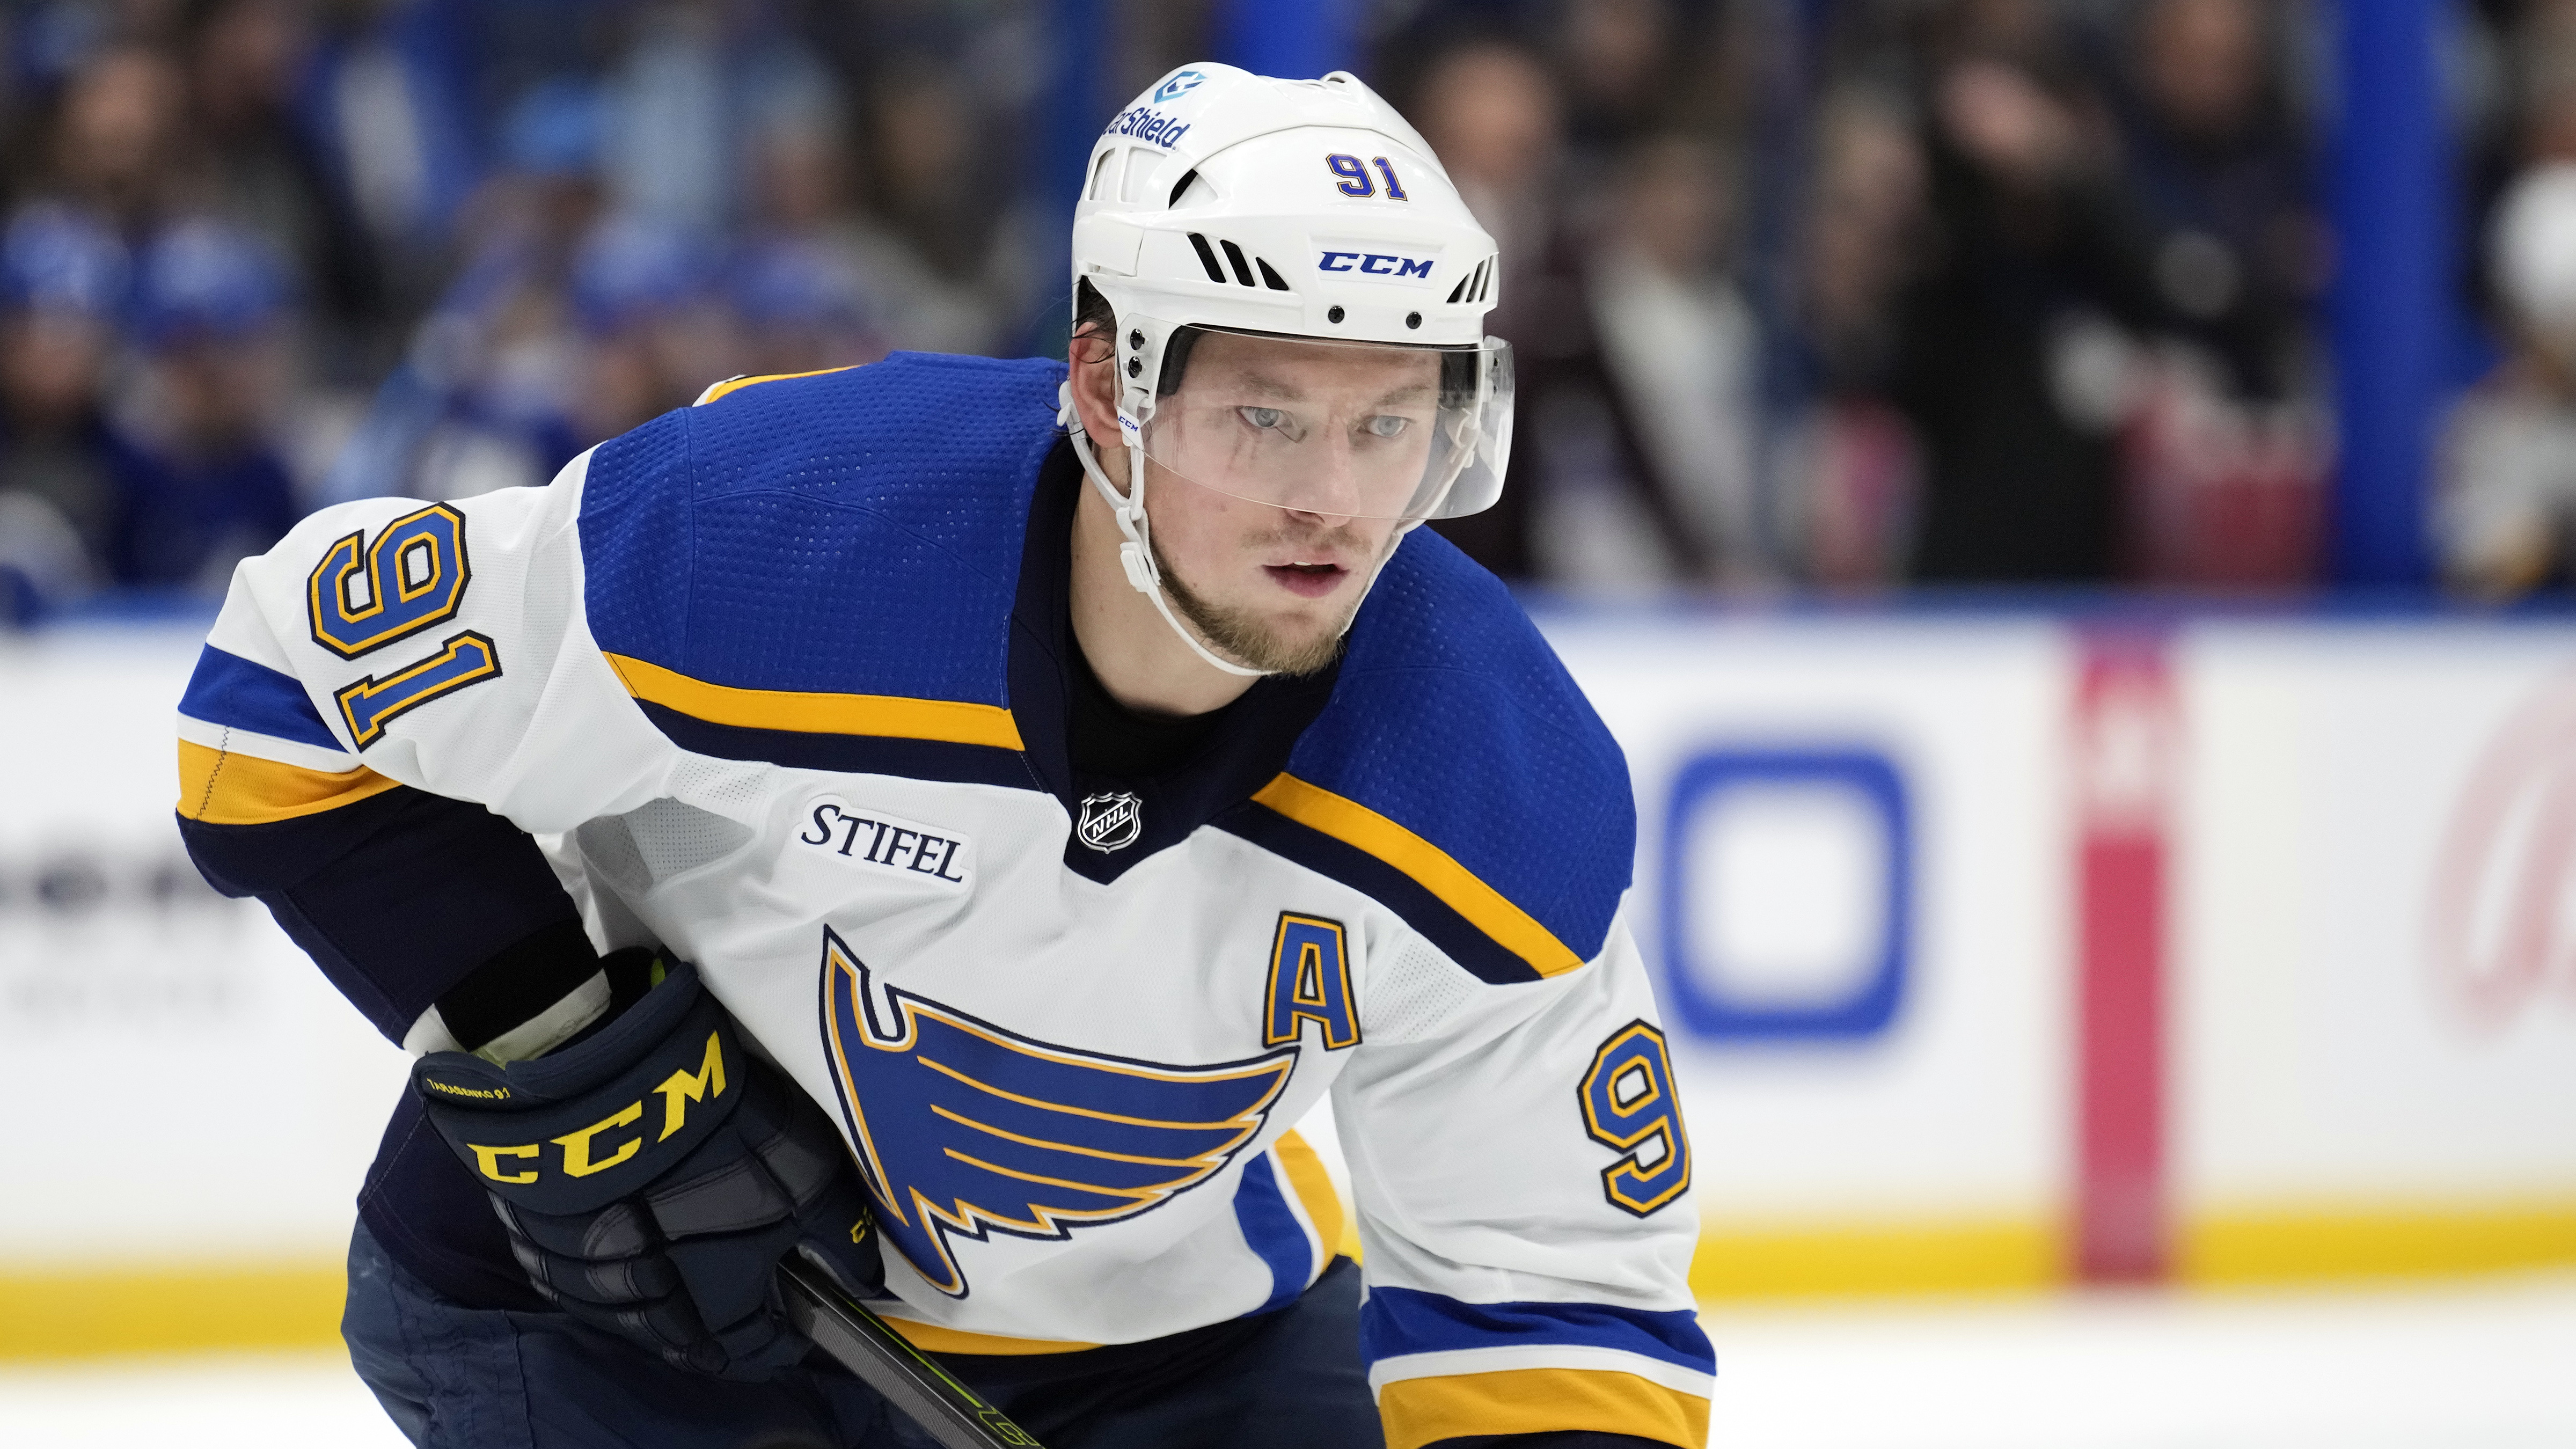 Blais comes home, matches Tarasenko with goal in first game since